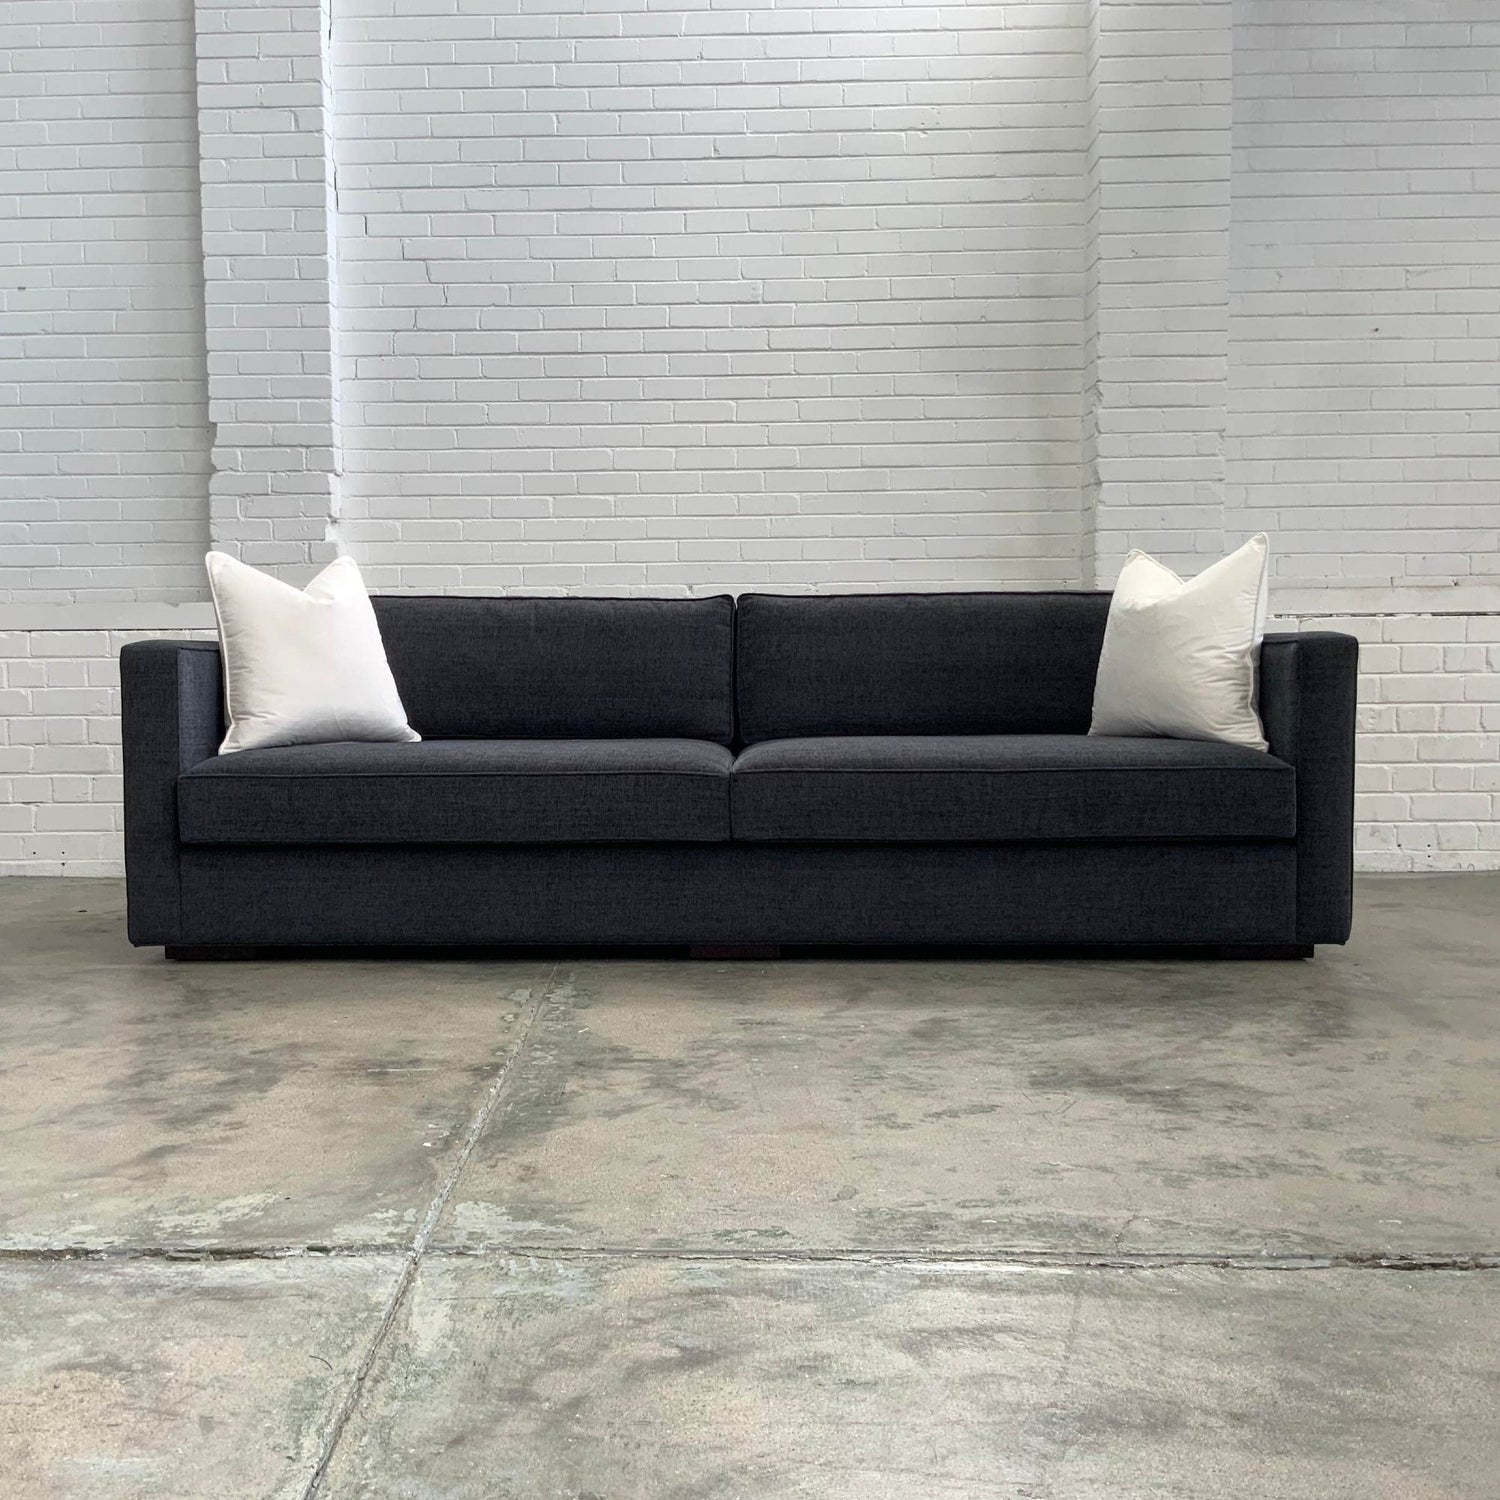 Newport Sofa | Premium Range Fabrics Multiple Sizes And Options Available Made To Order In Wa